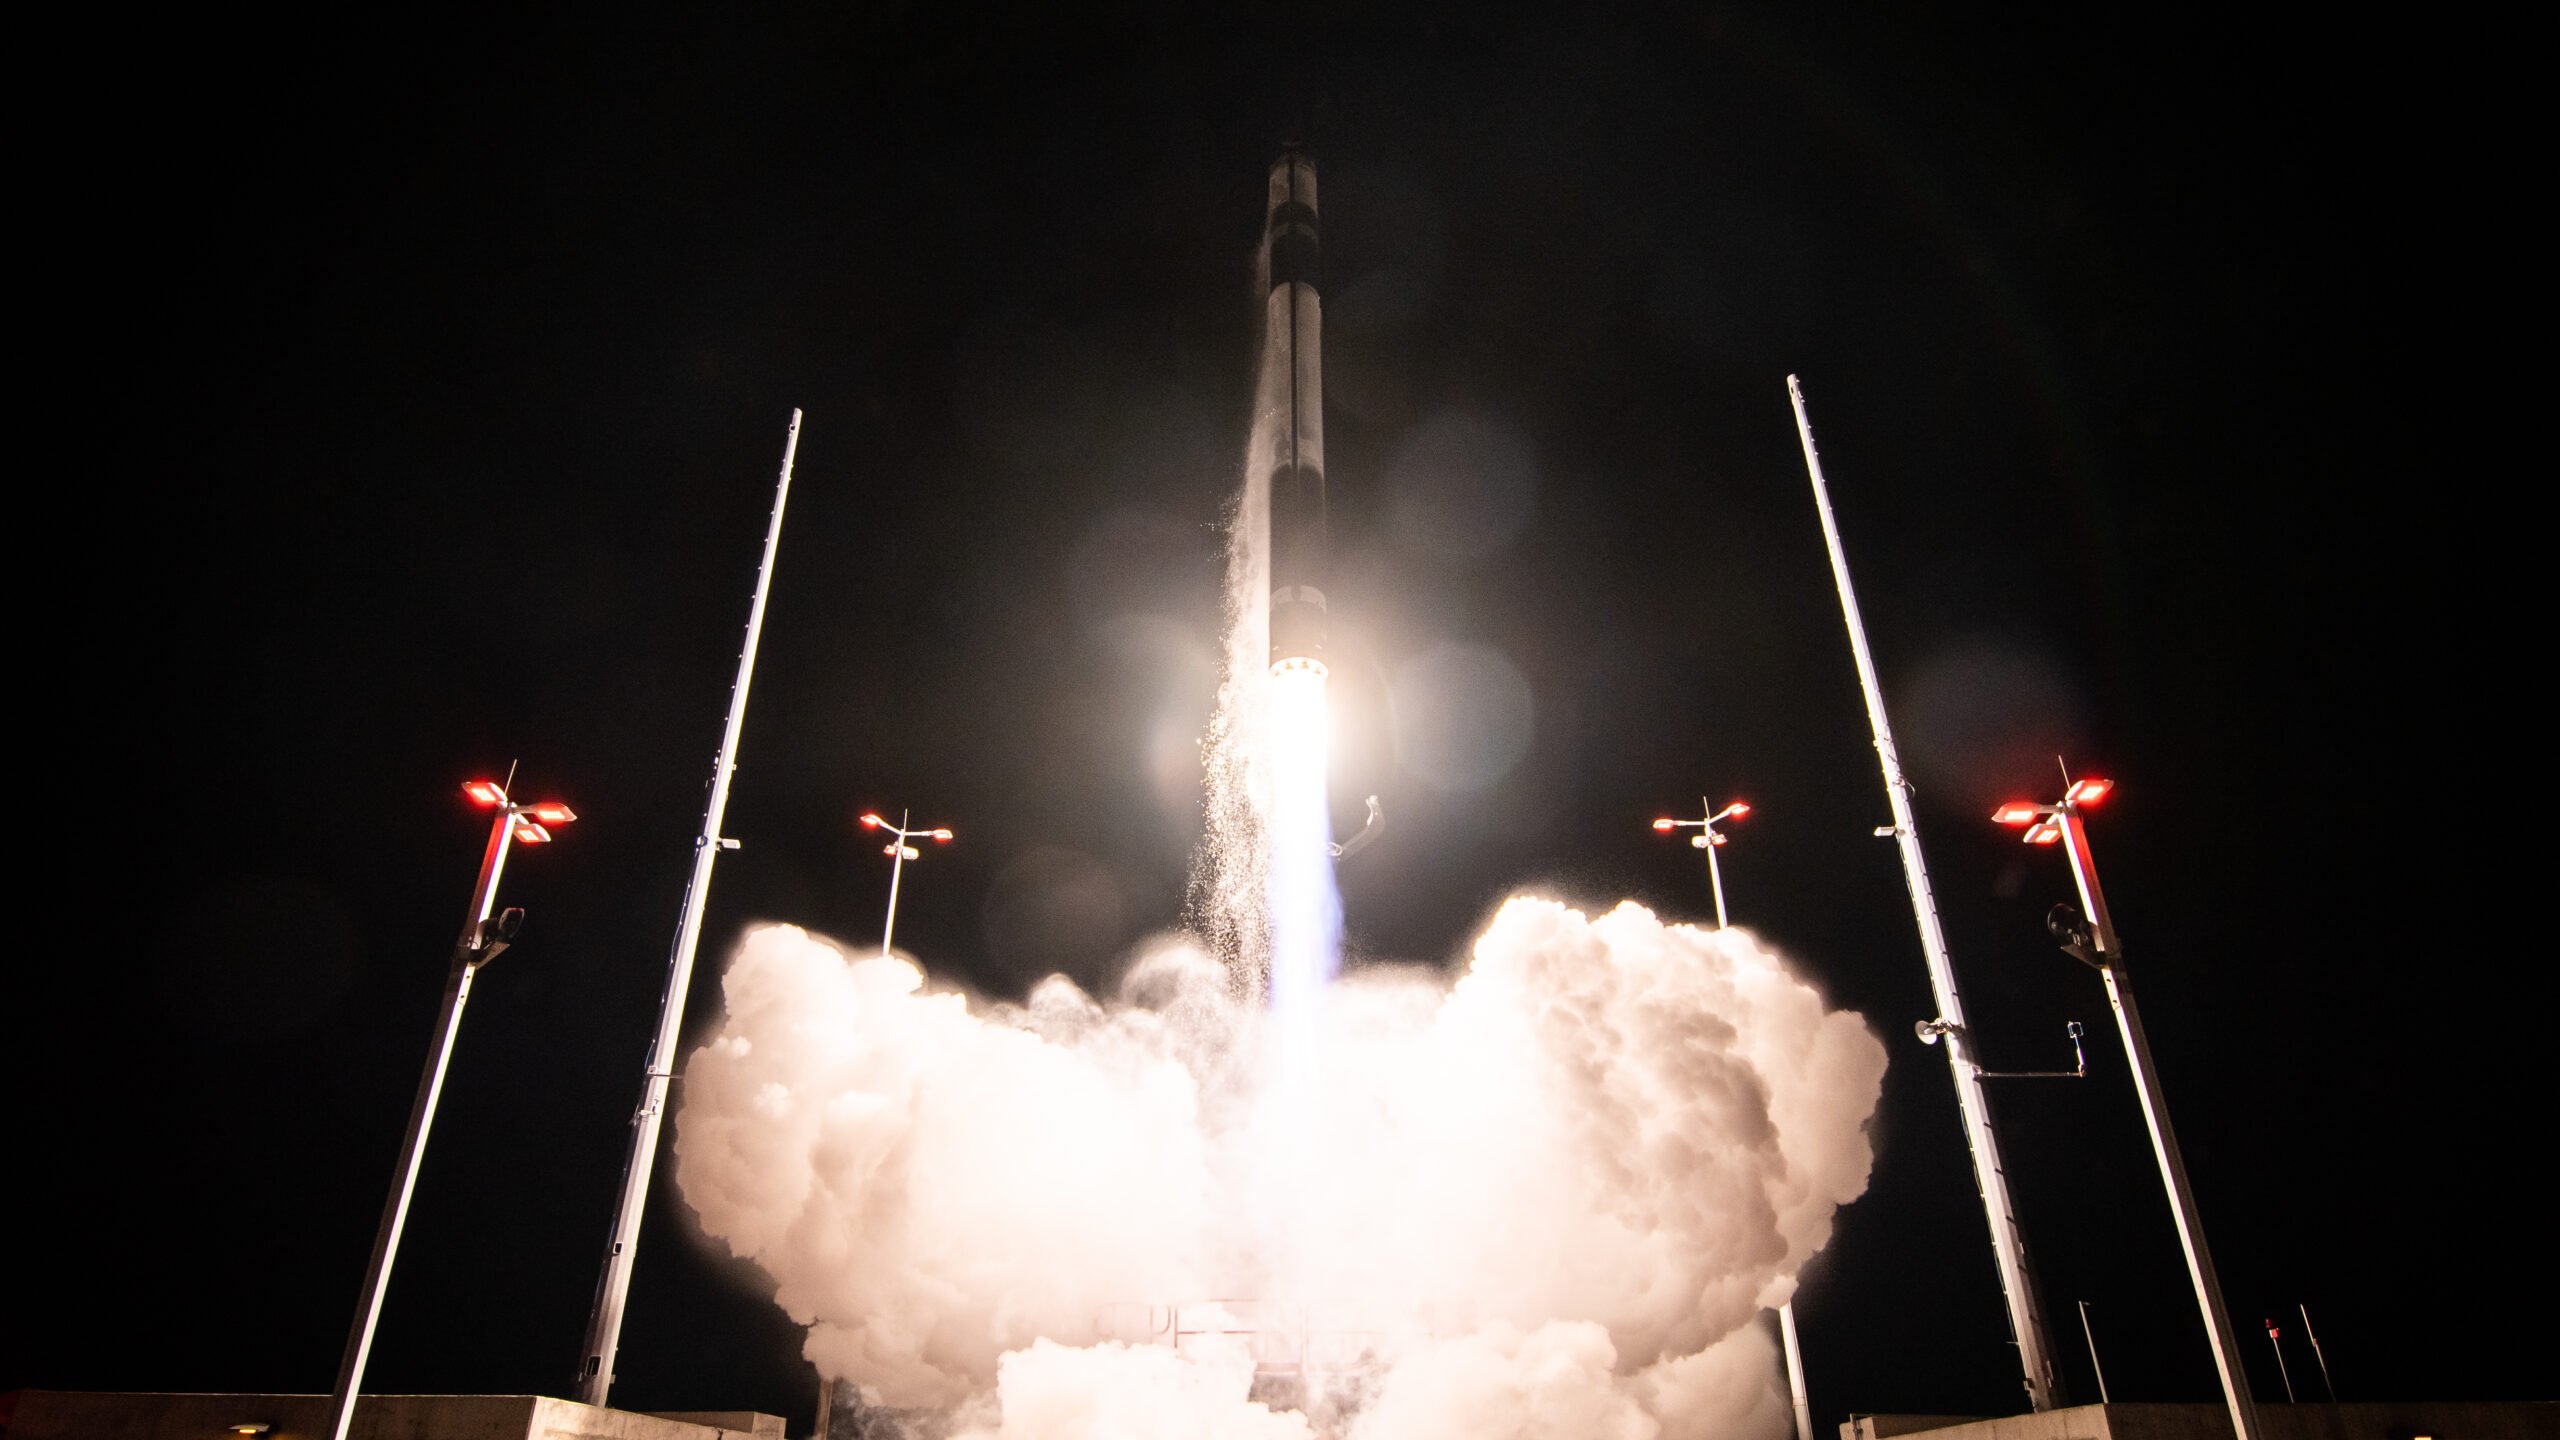 Space Force plans to open access for small providers to multibillion launch contracts